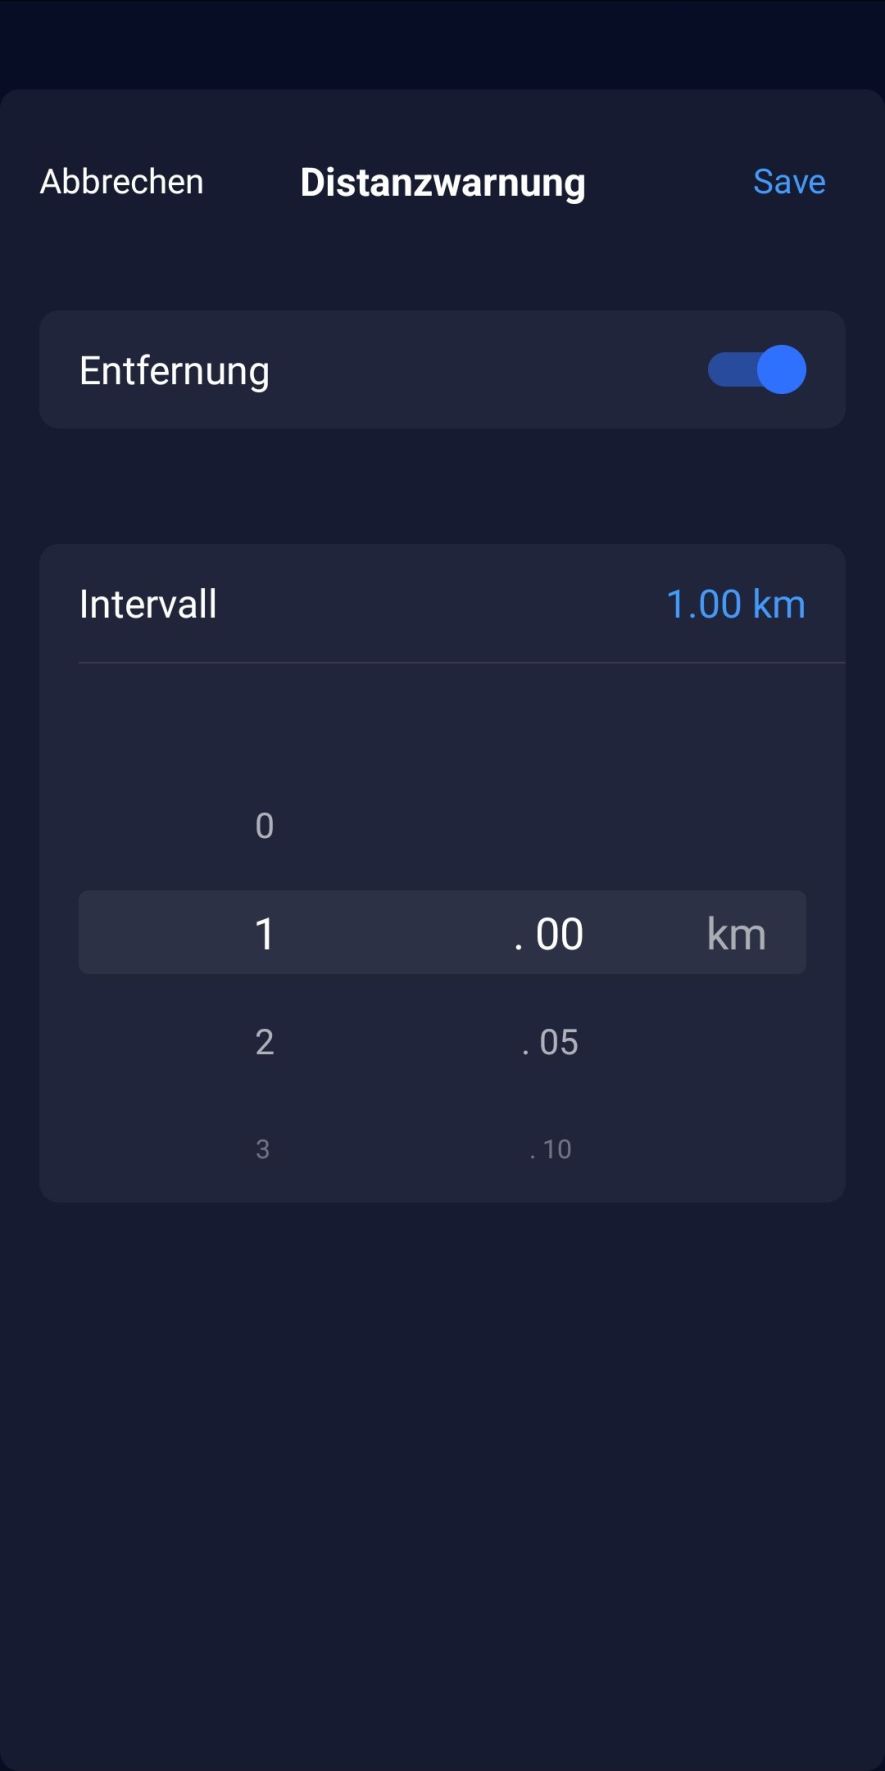 Selection of distance alarm for a sports profile in the Coros app